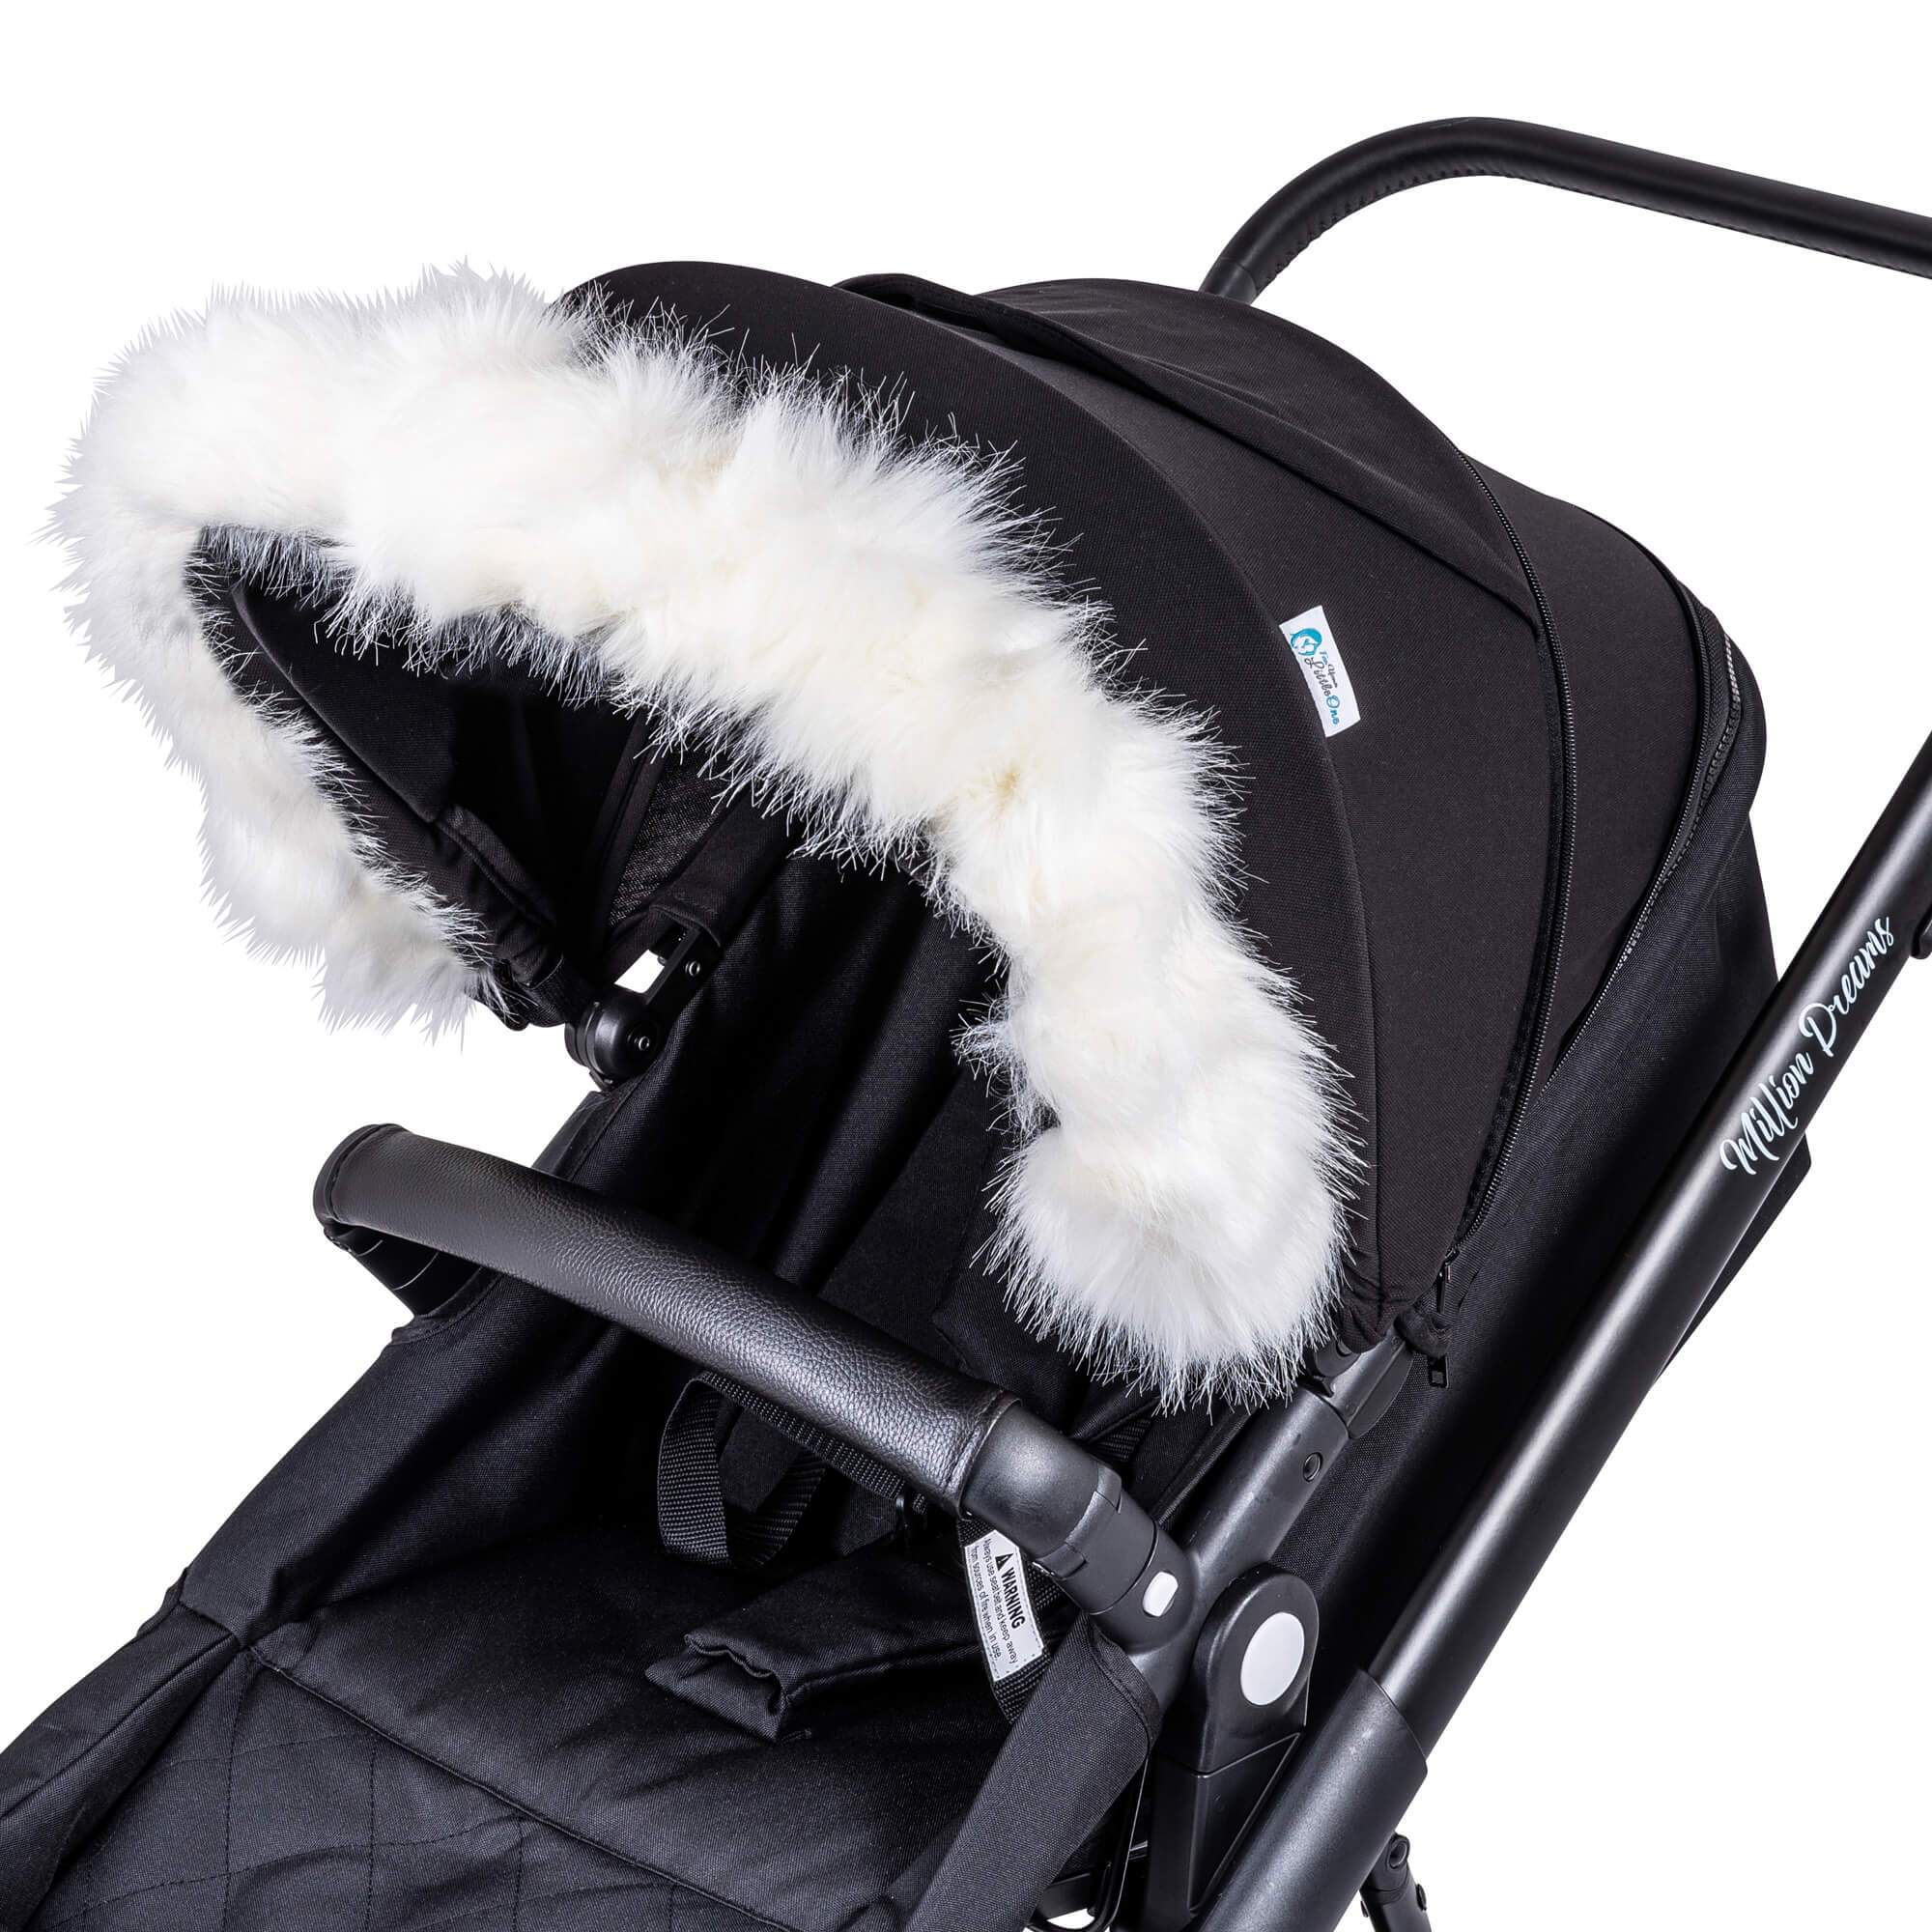 Pram Fur Hood Trim Attachment for Pushchair Compatible with Quax - For Your Little One